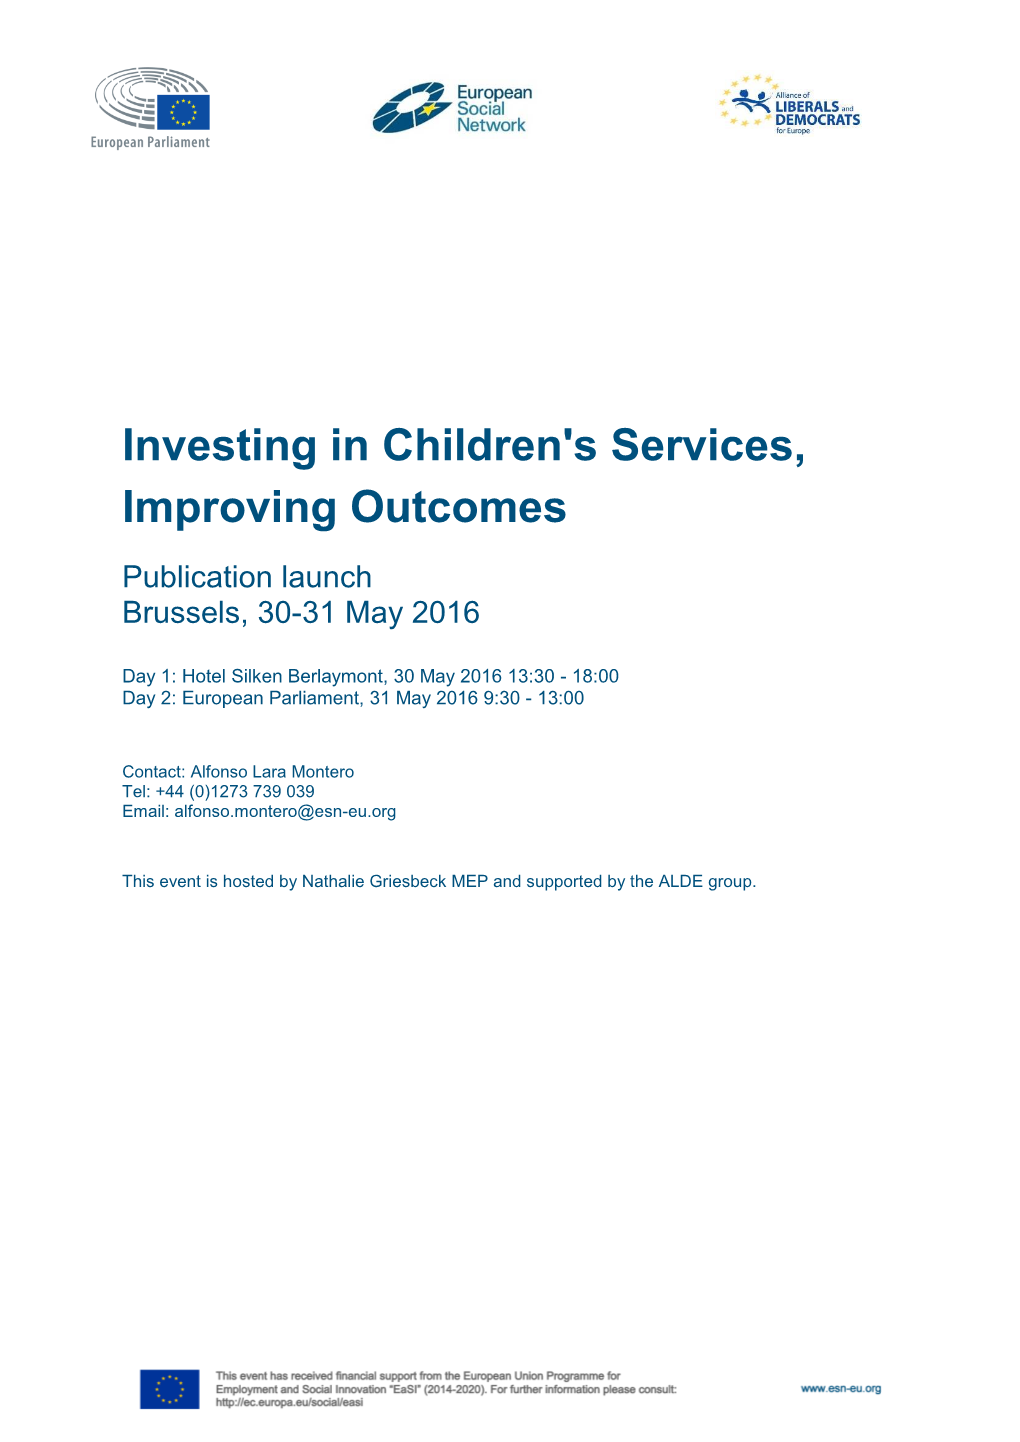 Investing in Children's Services, Improving Outcomes